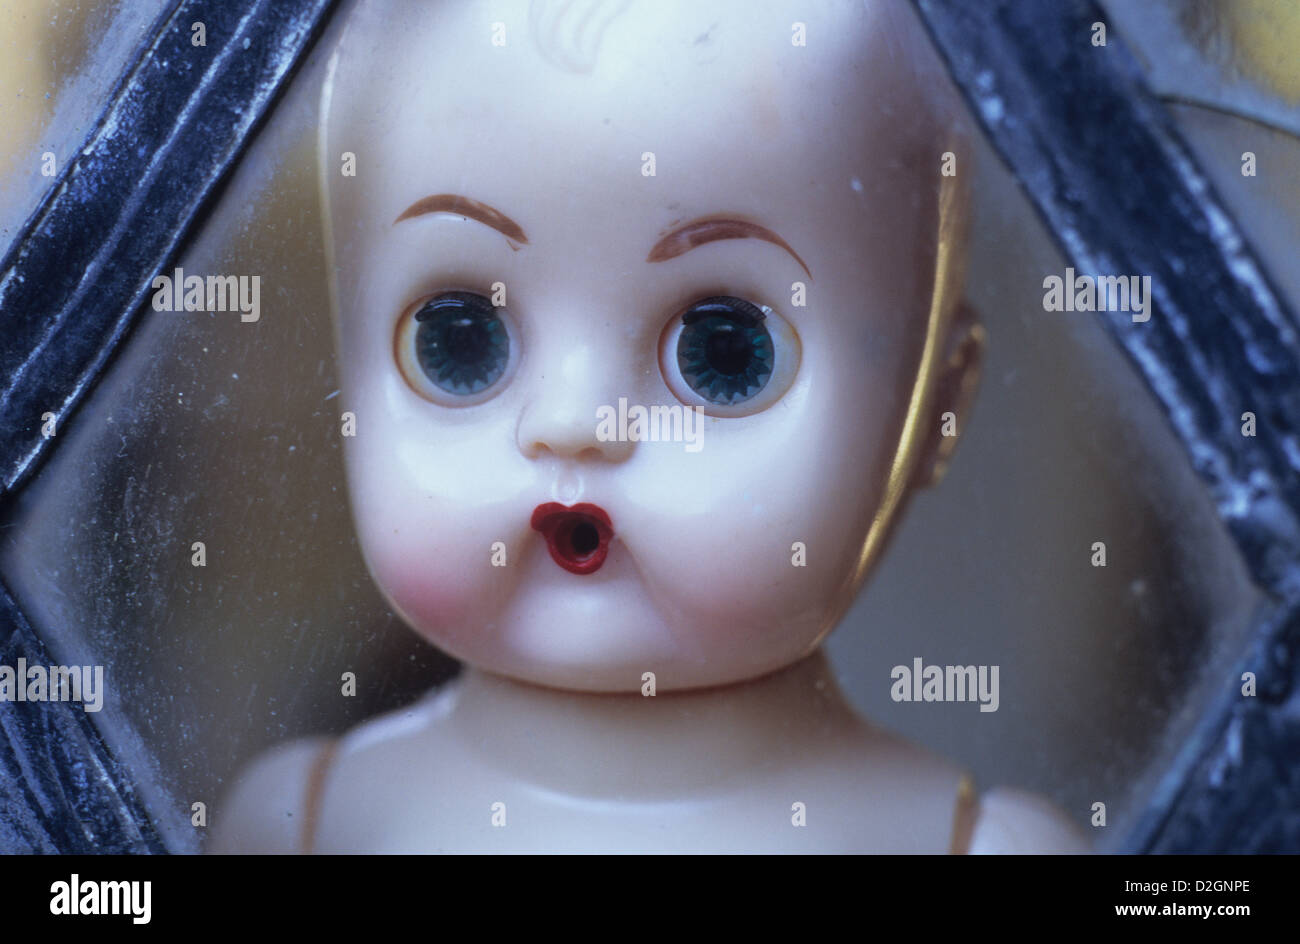 Head of traditional baby doll with big blue eyes and open mouth staring at viewer thru diamond-leaded window Stock Photo